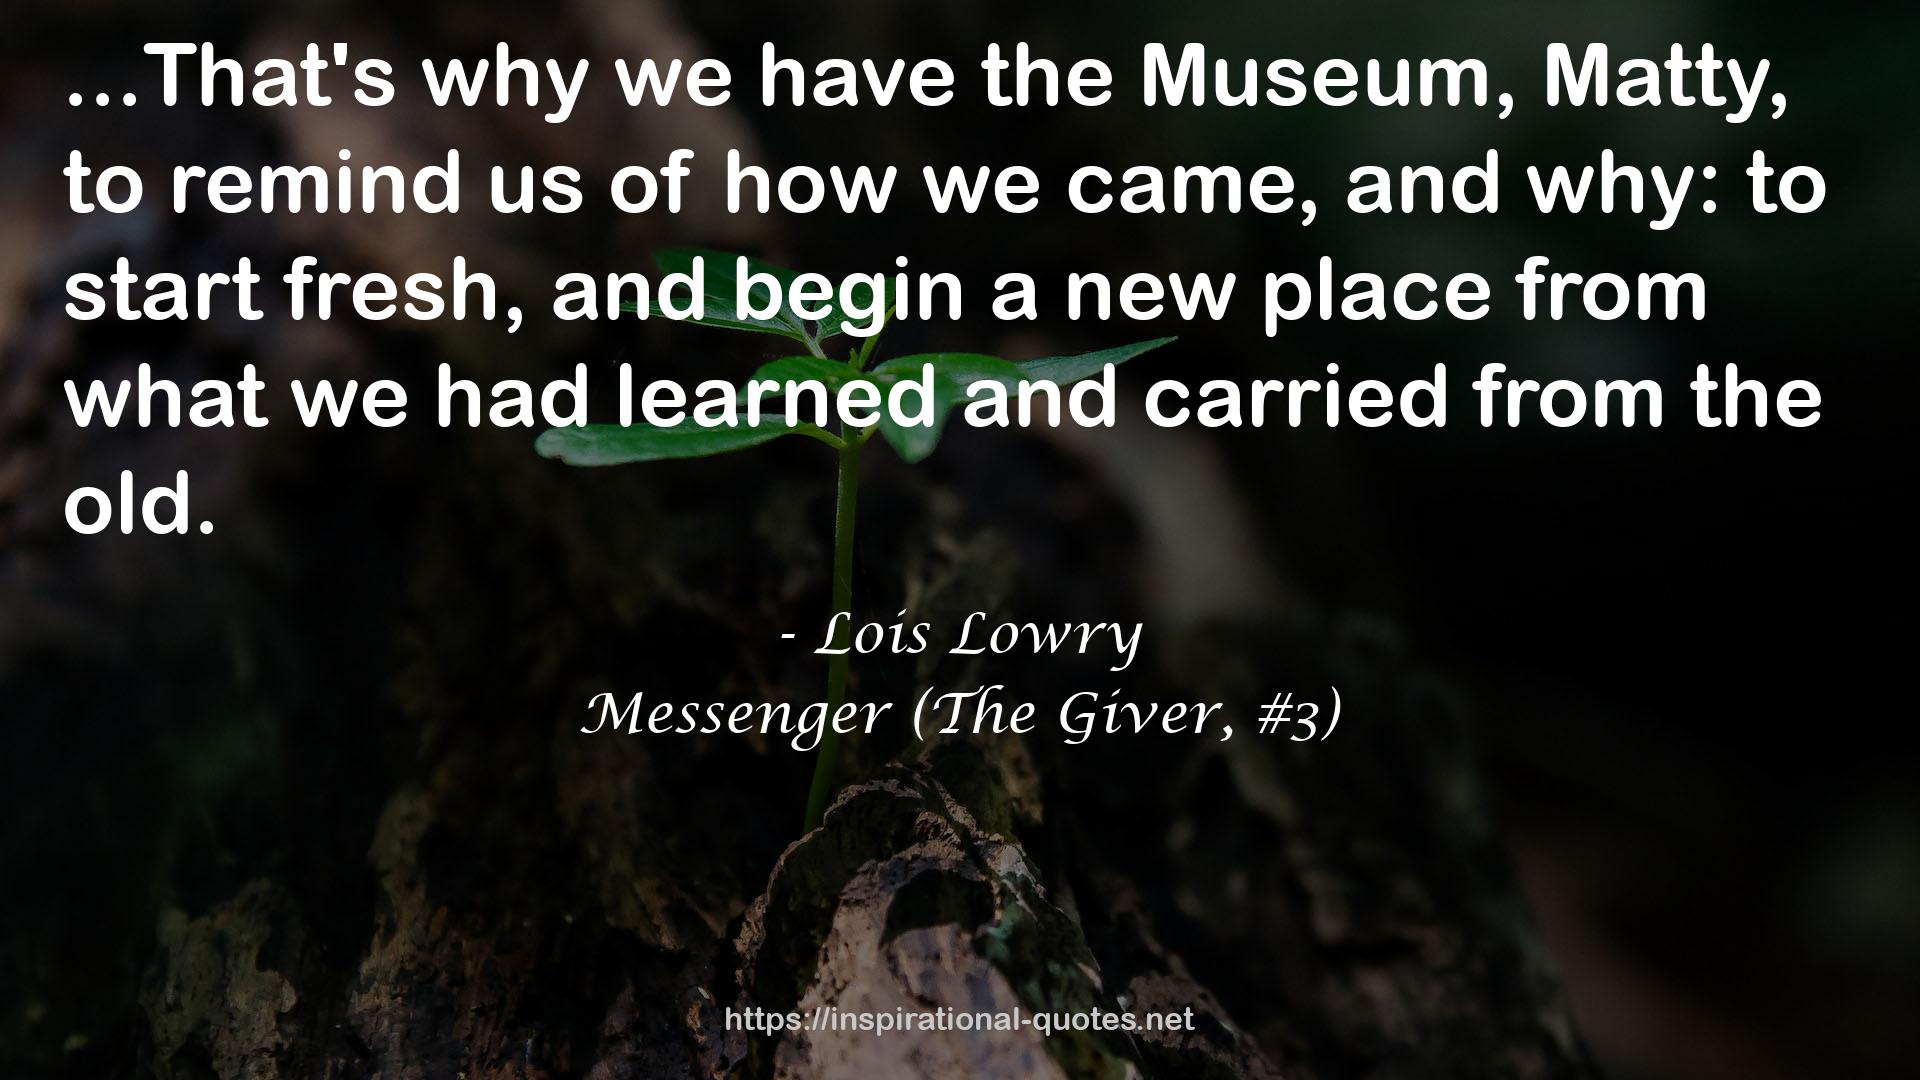 Messenger (The Giver, #3) QUOTES